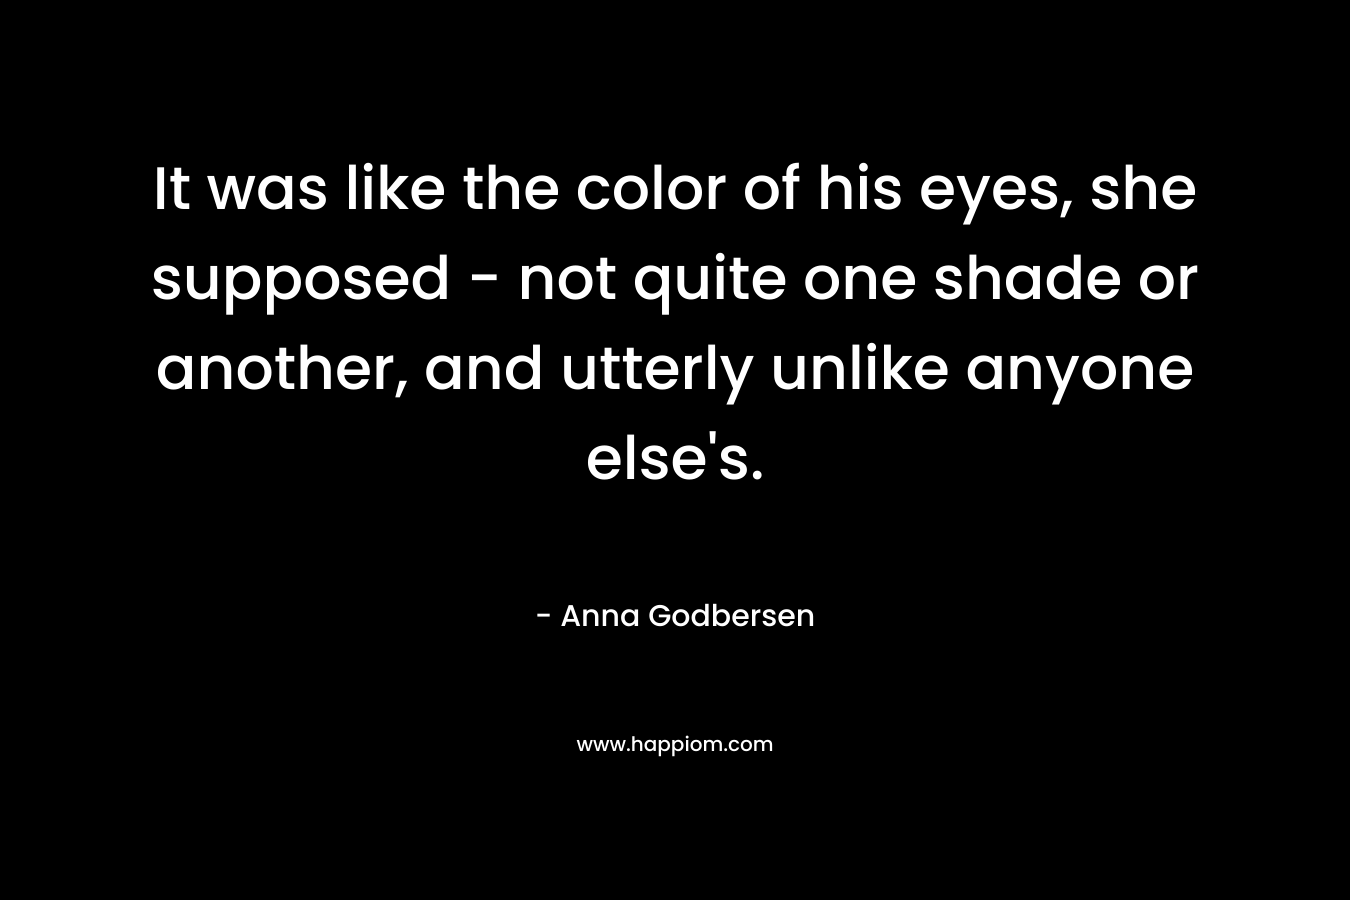 It was like the color of his eyes, she supposed – not quite one shade or another, and utterly unlike anyone else’s. – Anna Godbersen